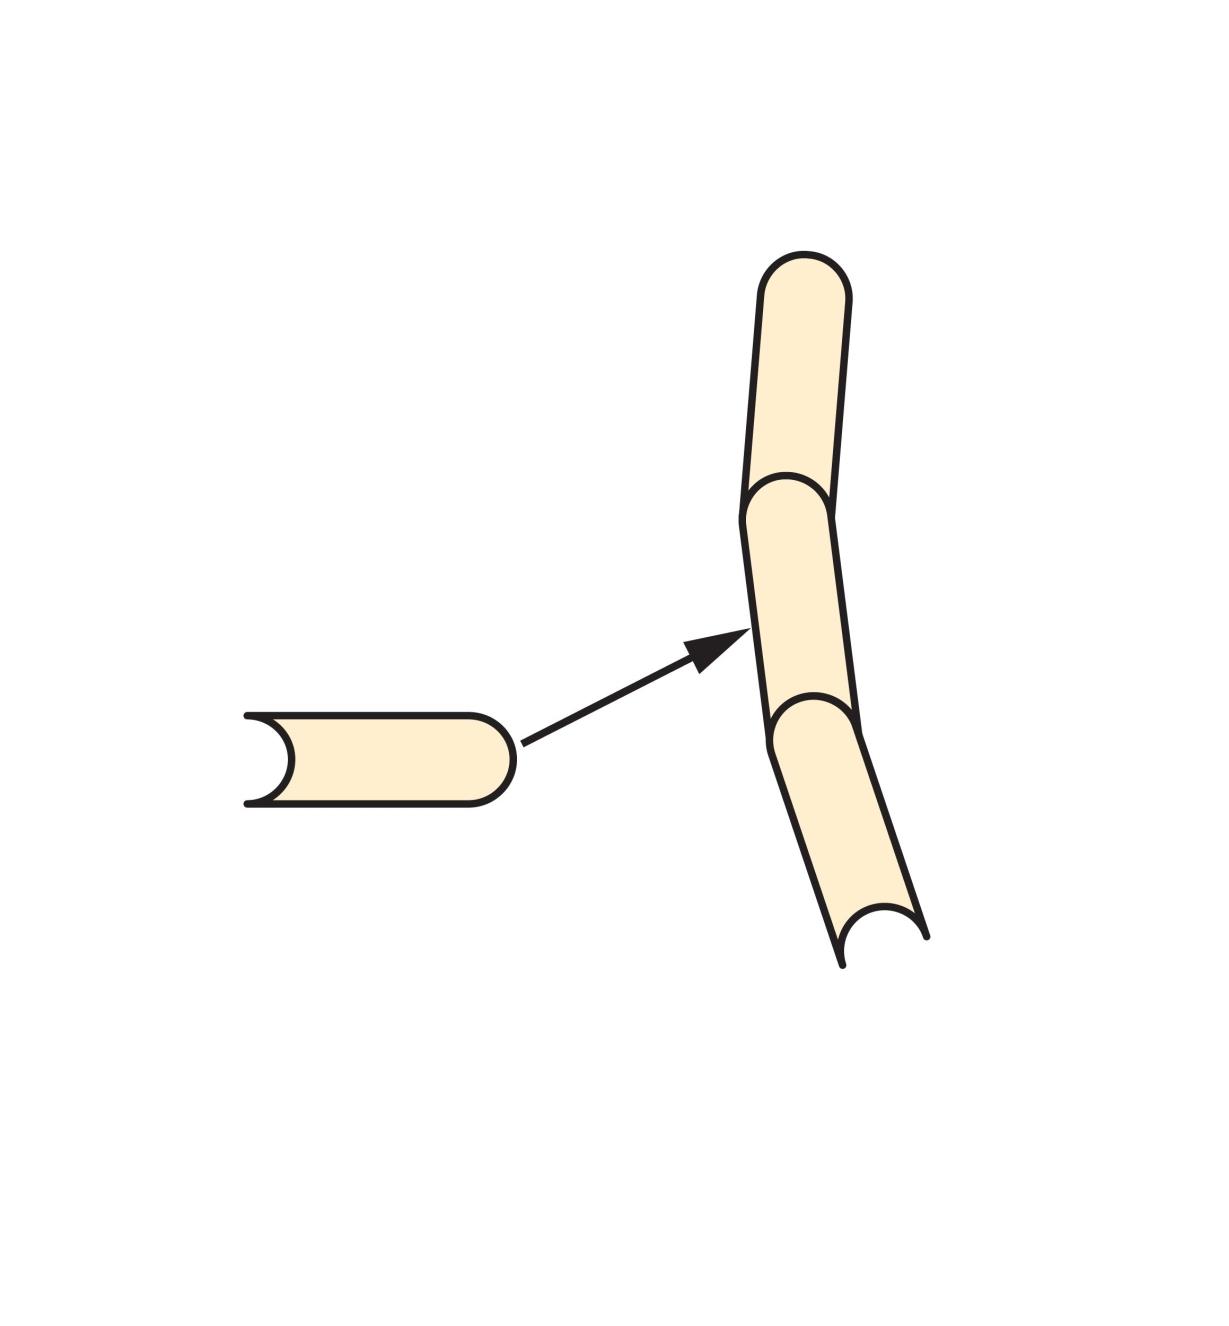 Illustration of wood strips with flute and bead edges fitted together to form a curved surface